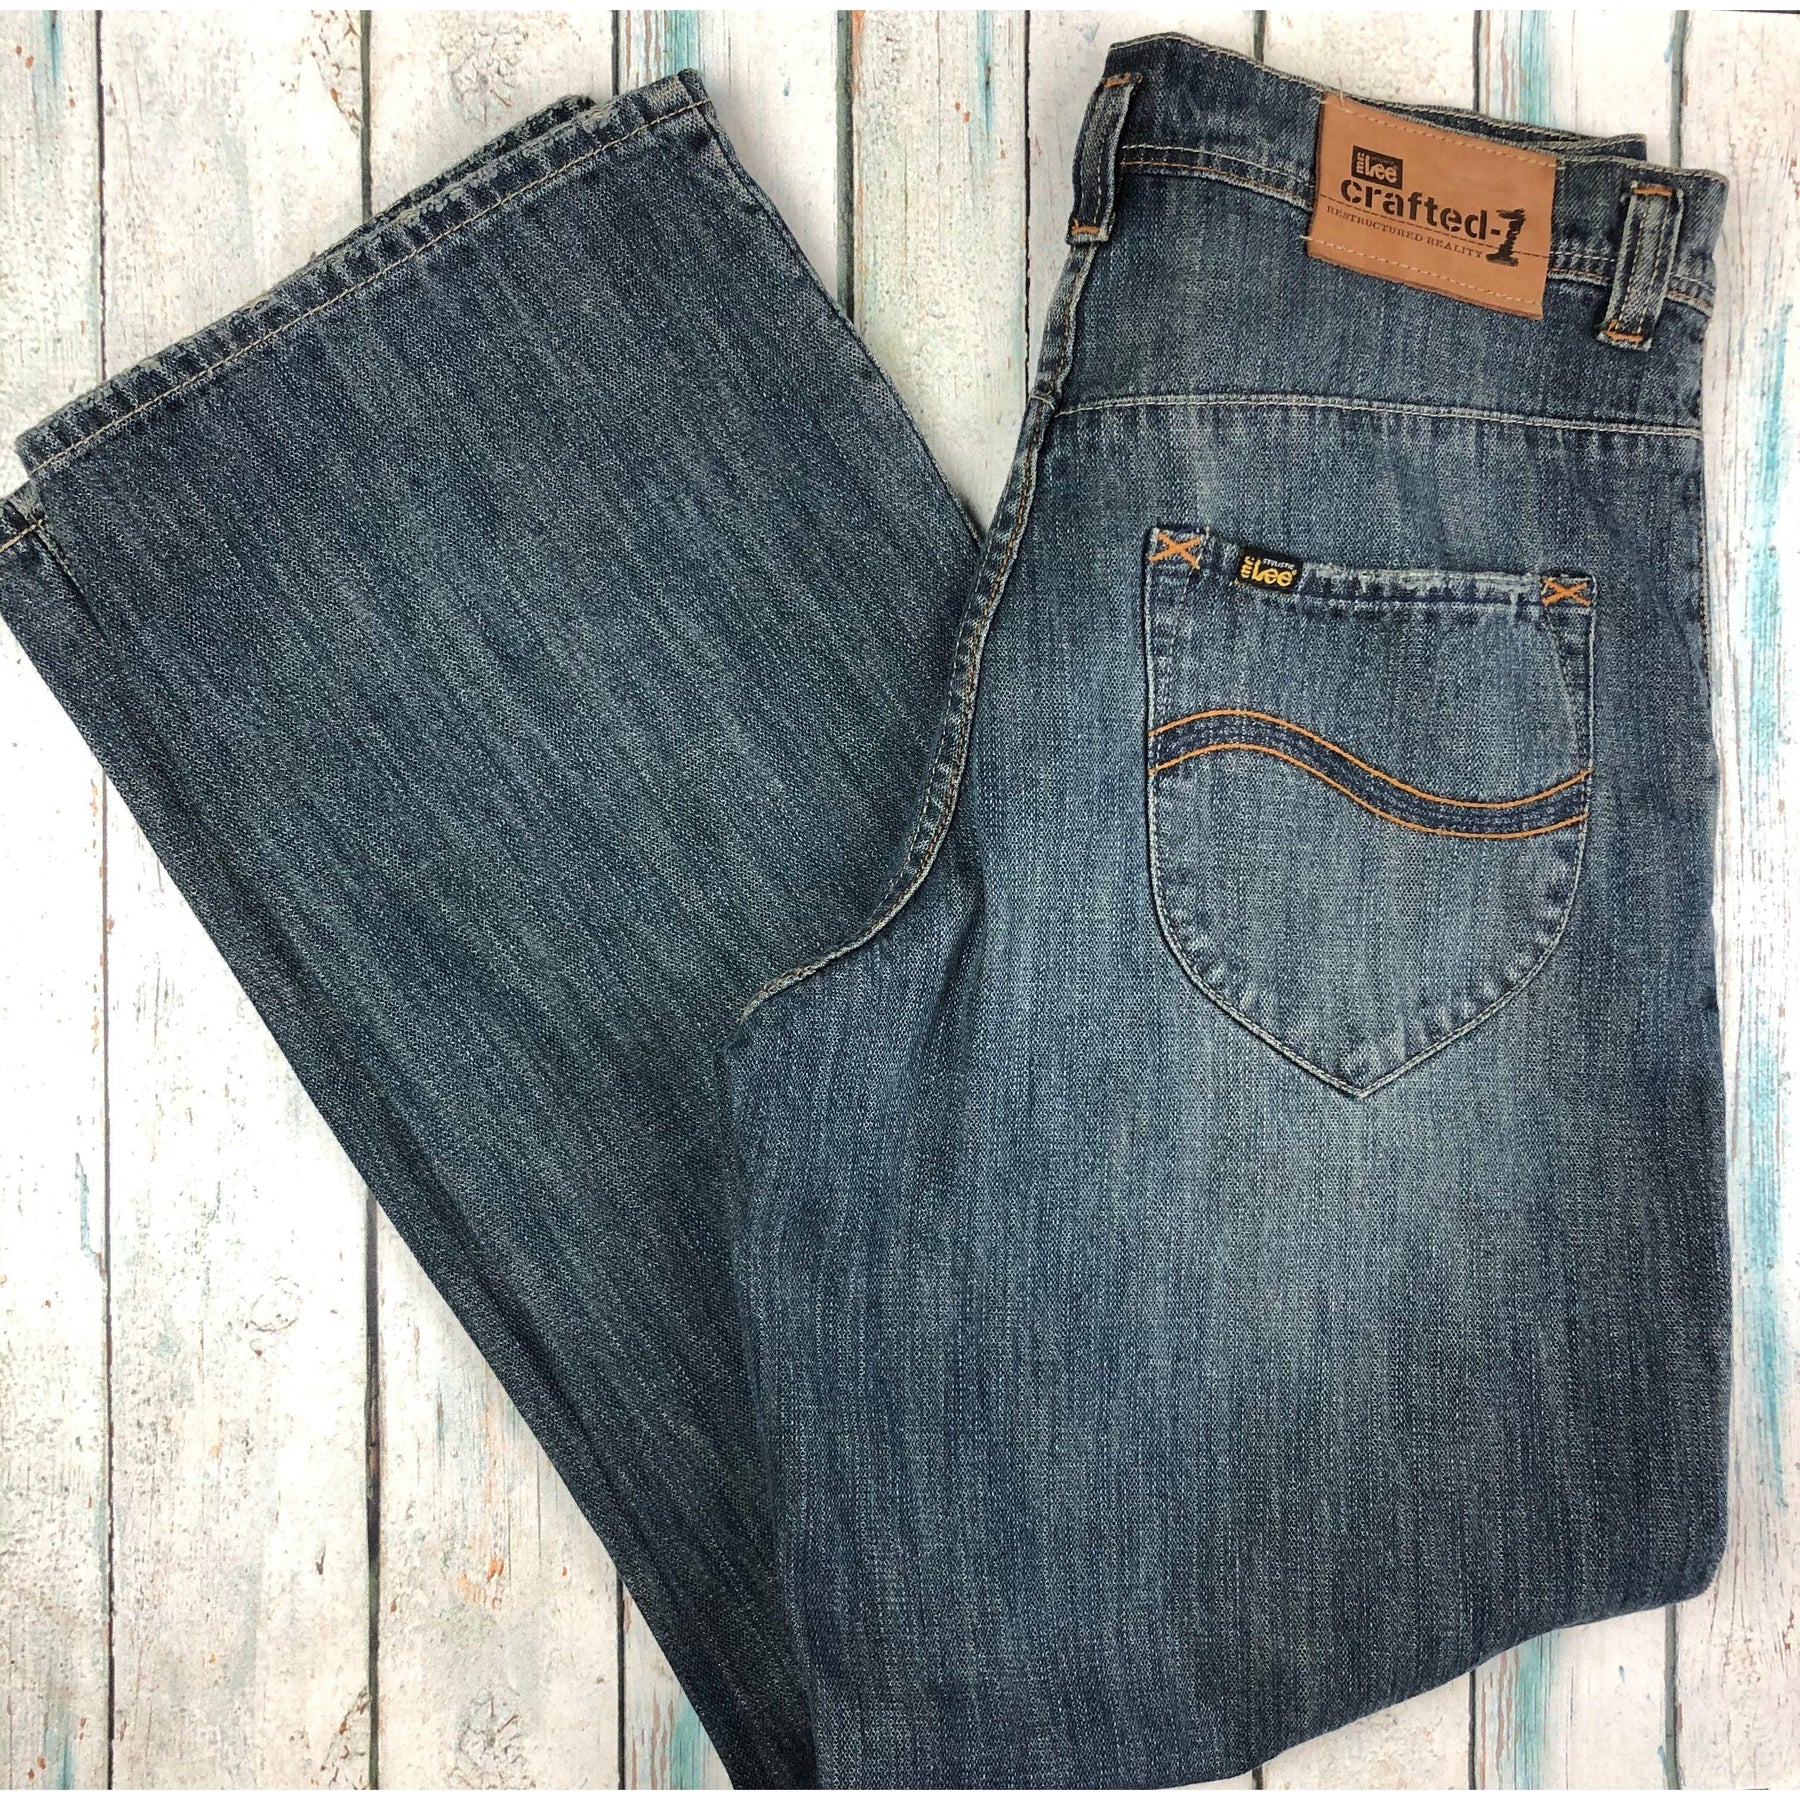 lee crafted jeans